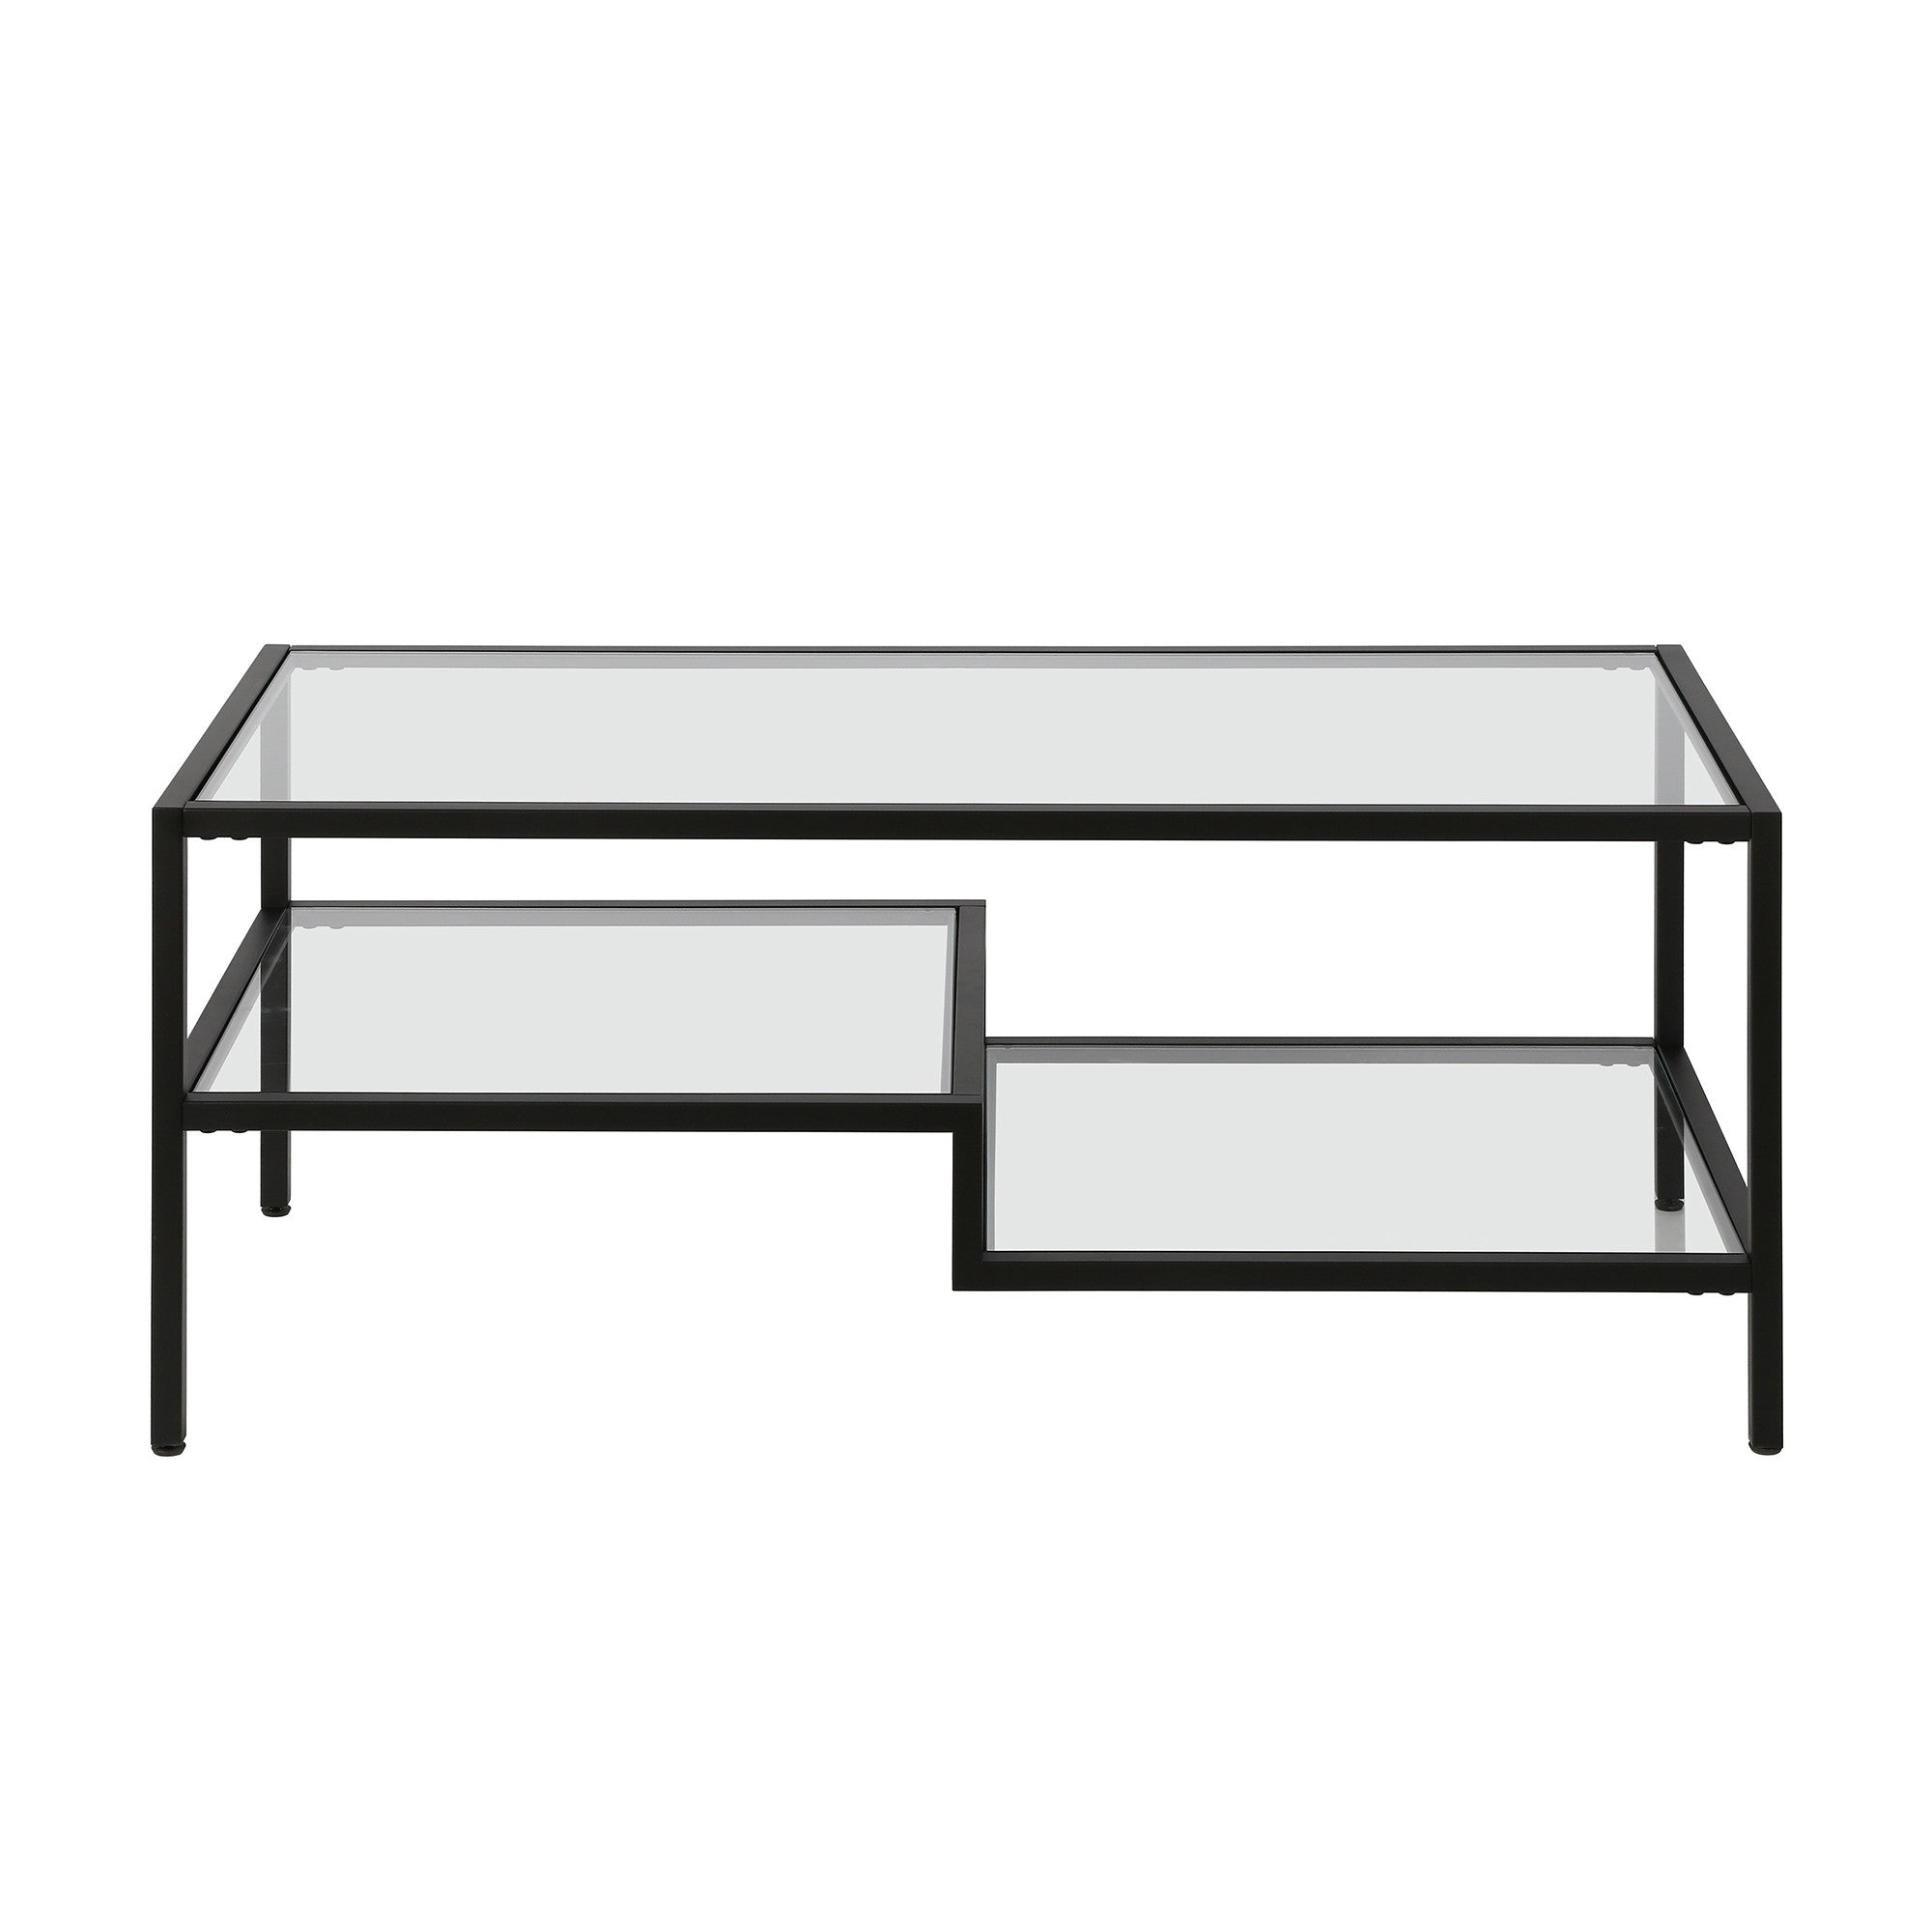 45" Black Glass And Steel Coffee Table With Two Shelves